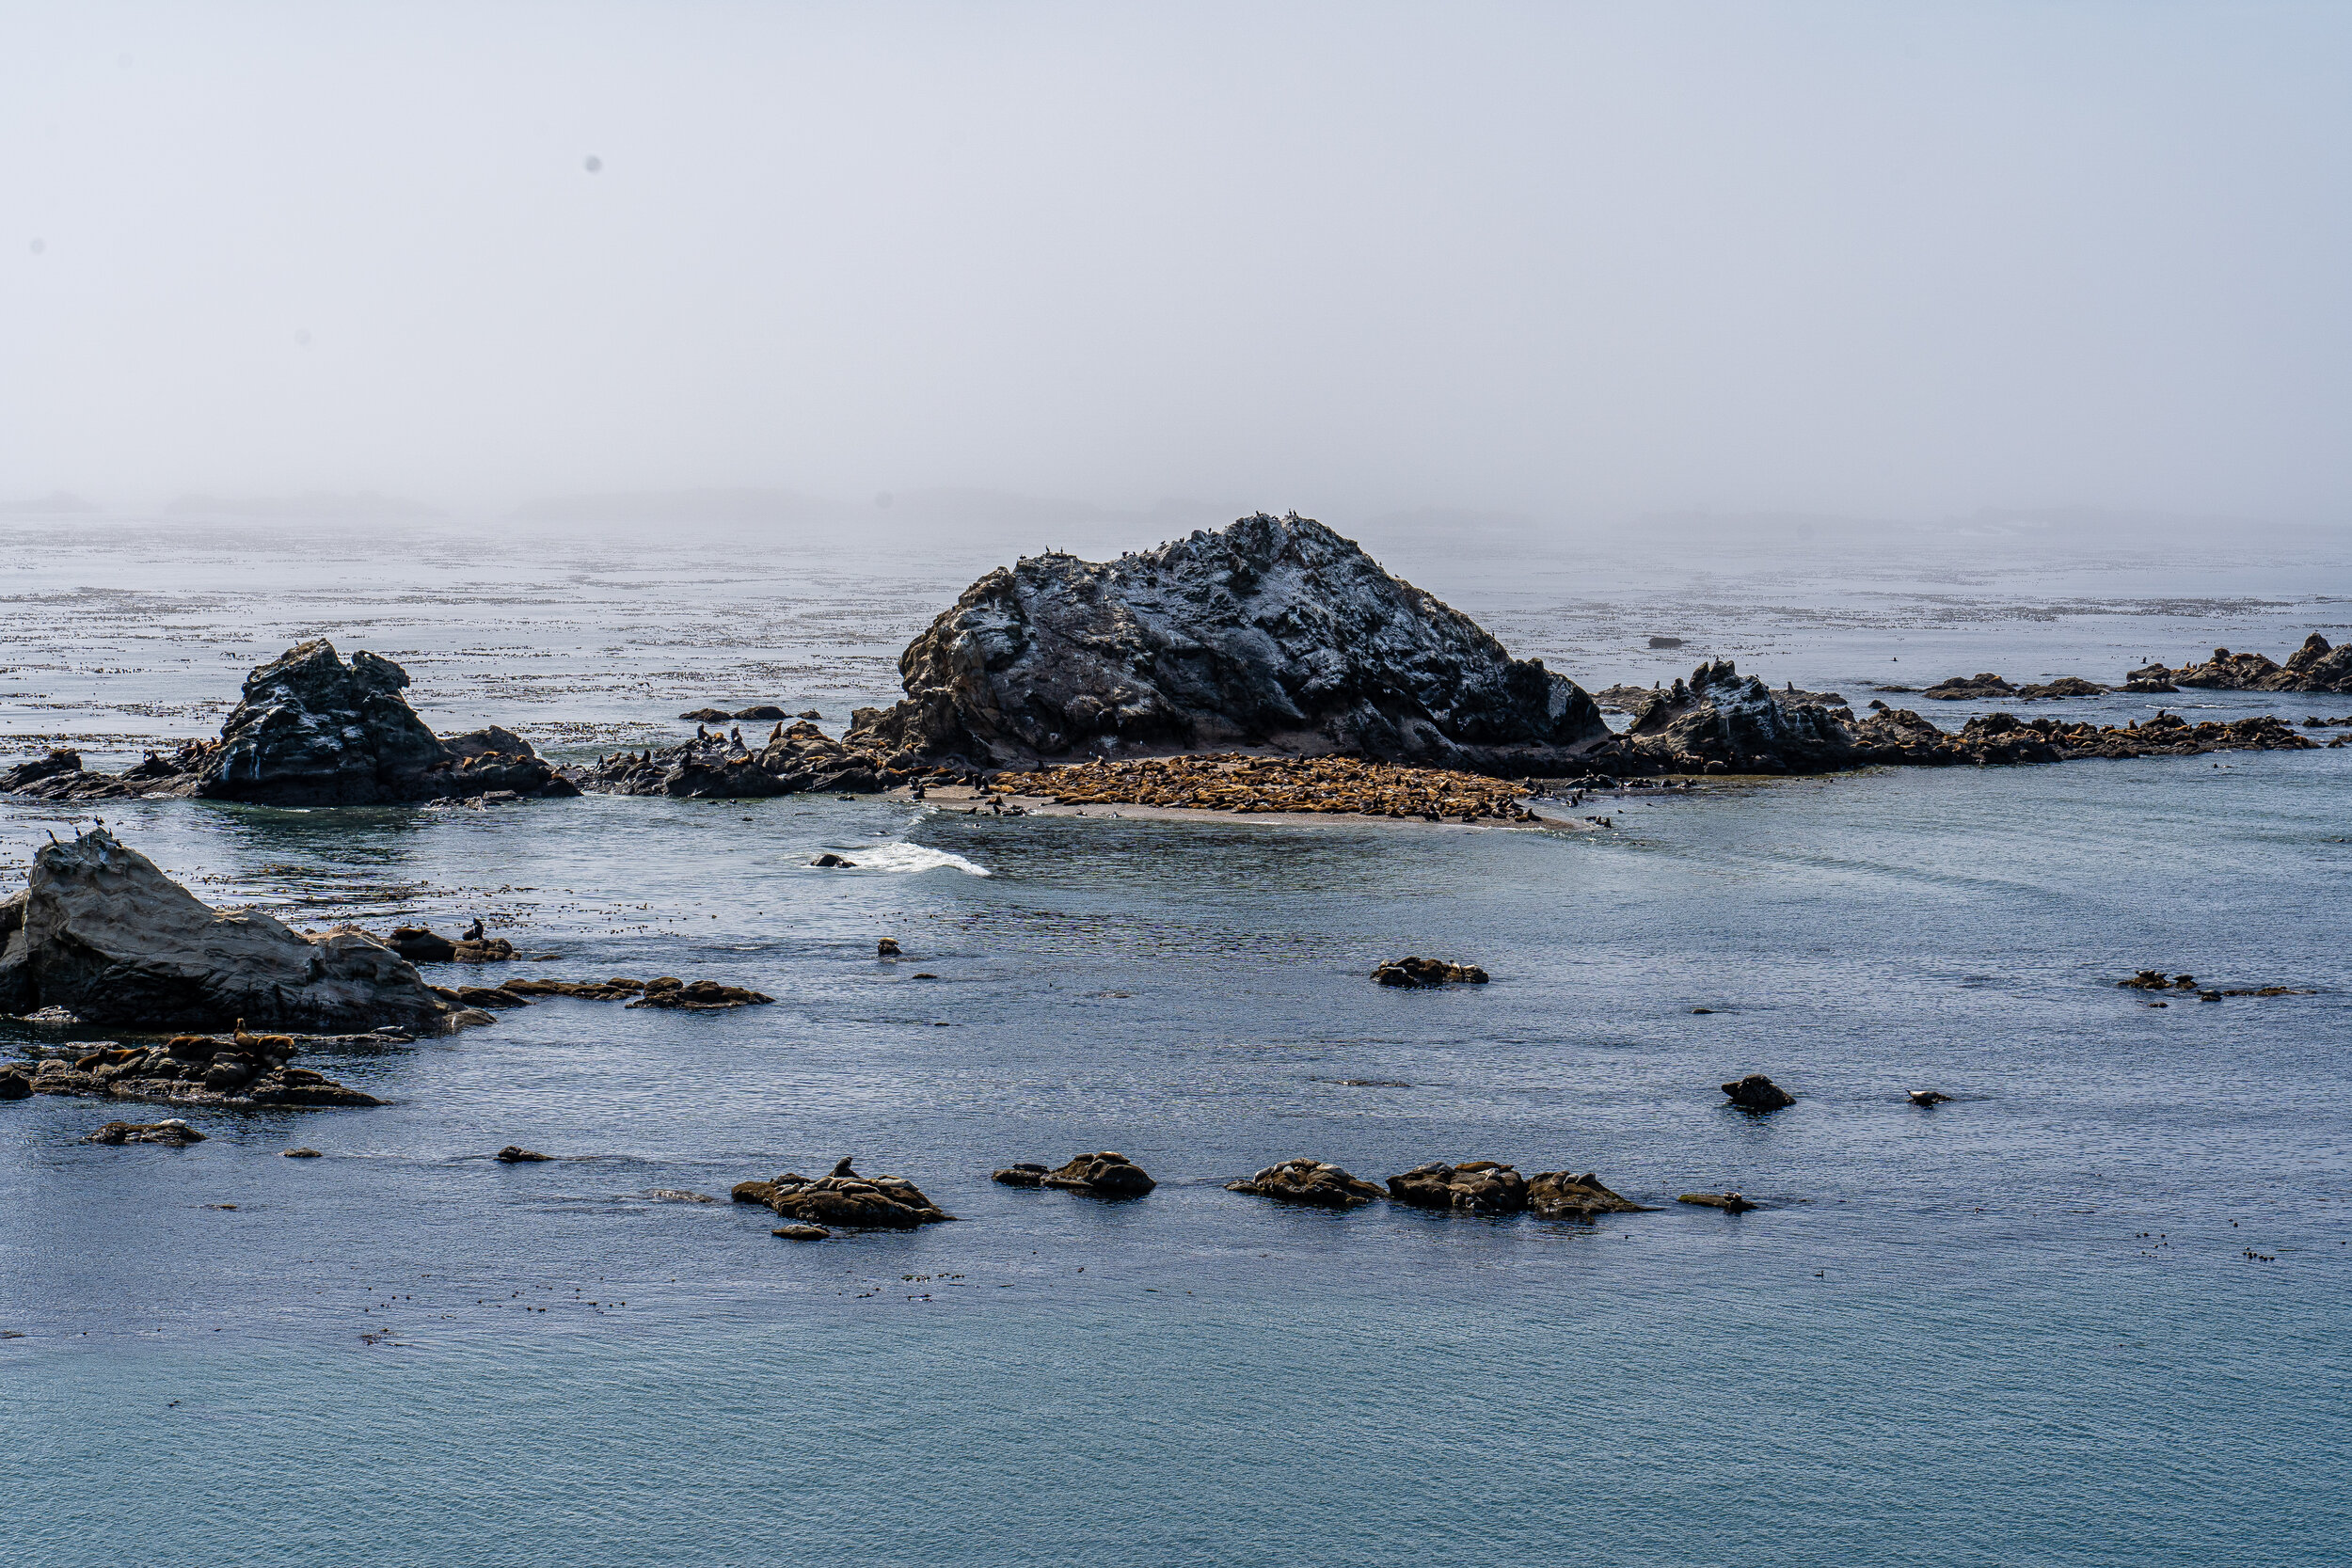  Later down the road, we saw piles and piles of sea lions and seals out on various rocks.  